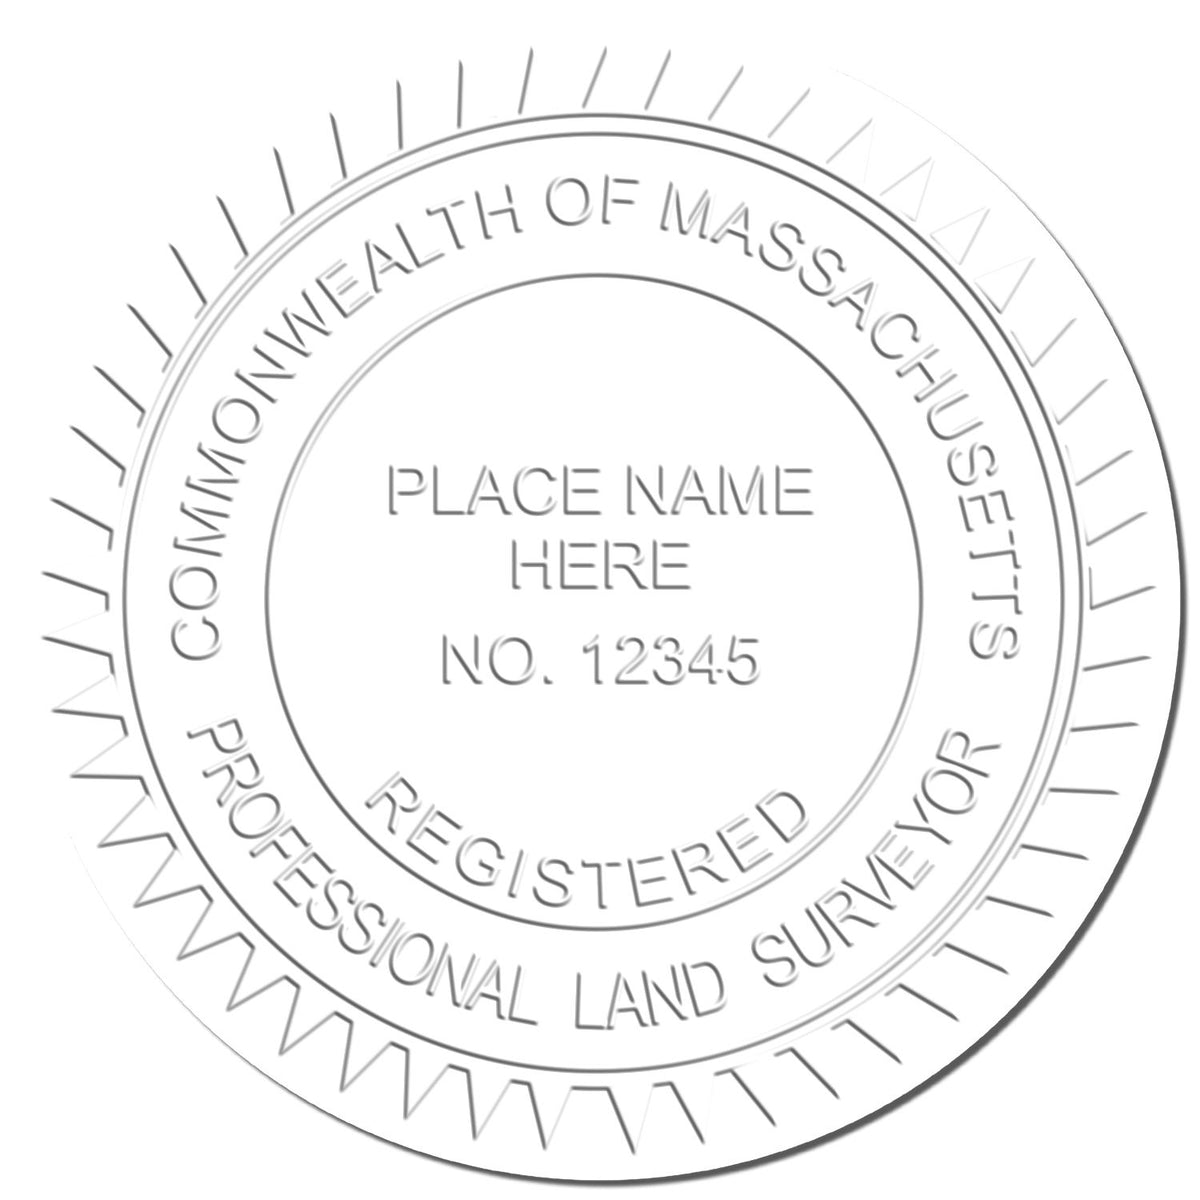 This paper is stamped with a sample imprint of the Extended Long Reach Massachusetts Surveyor Embosser, signifying its quality and reliability.